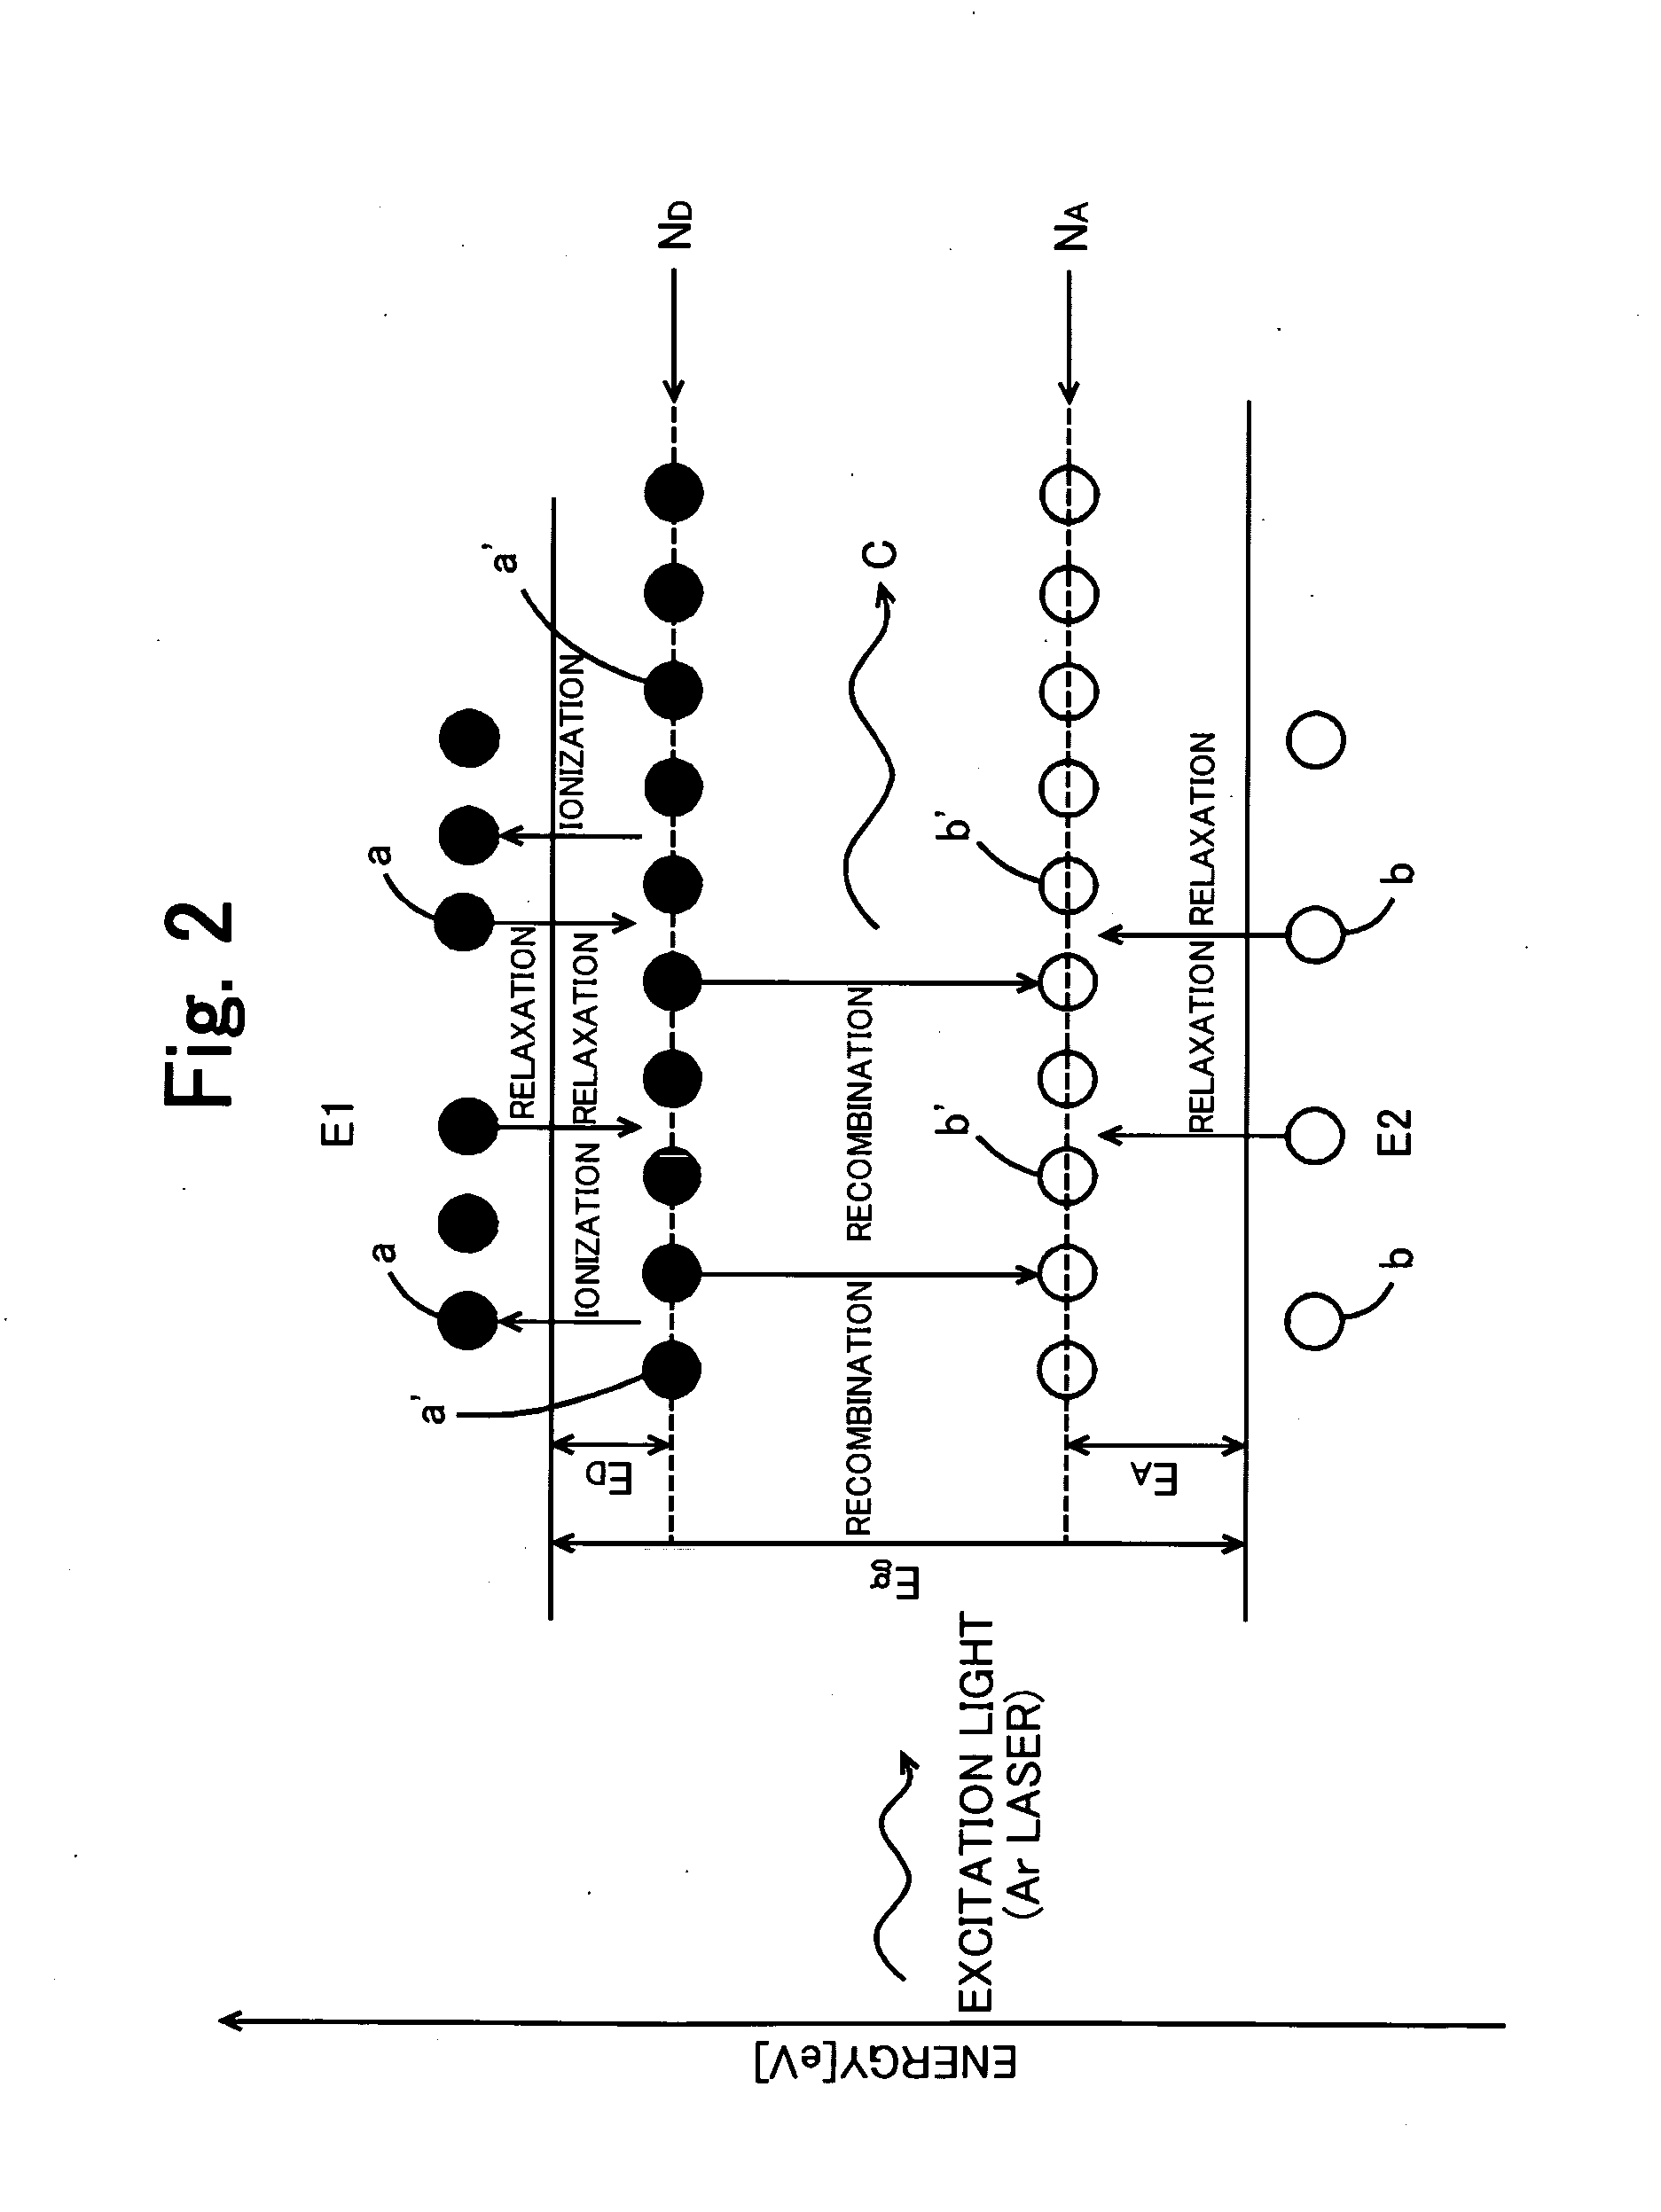 SiC crystal and semiconductor device